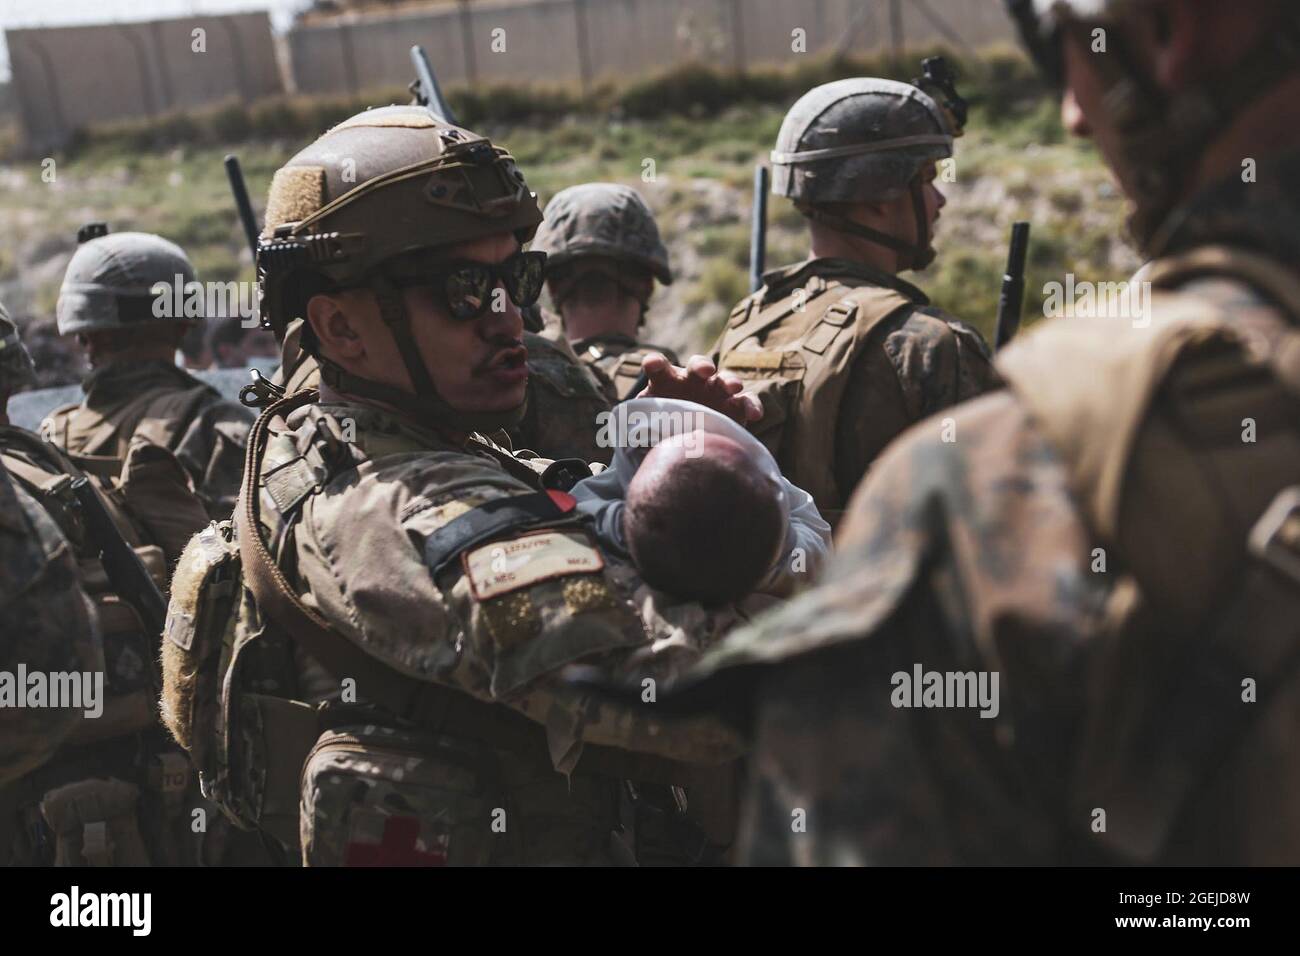 Kabul, Afghanistan. 20th Aug, 2021. An Airmen comforts an infant during an evacuation at Hamid Karzai International Airport, in Kabul, Afghanistan, August 20, 2021. U.S. service members and coalition partners are assisting the Department of State with a Non-combatant Evacuation Operation (NEO) in Afghanistan. Photo by Sgt. Isaiah Campbell/USMC/UPI Credit: UPI/Alamy Live News Stock Photo